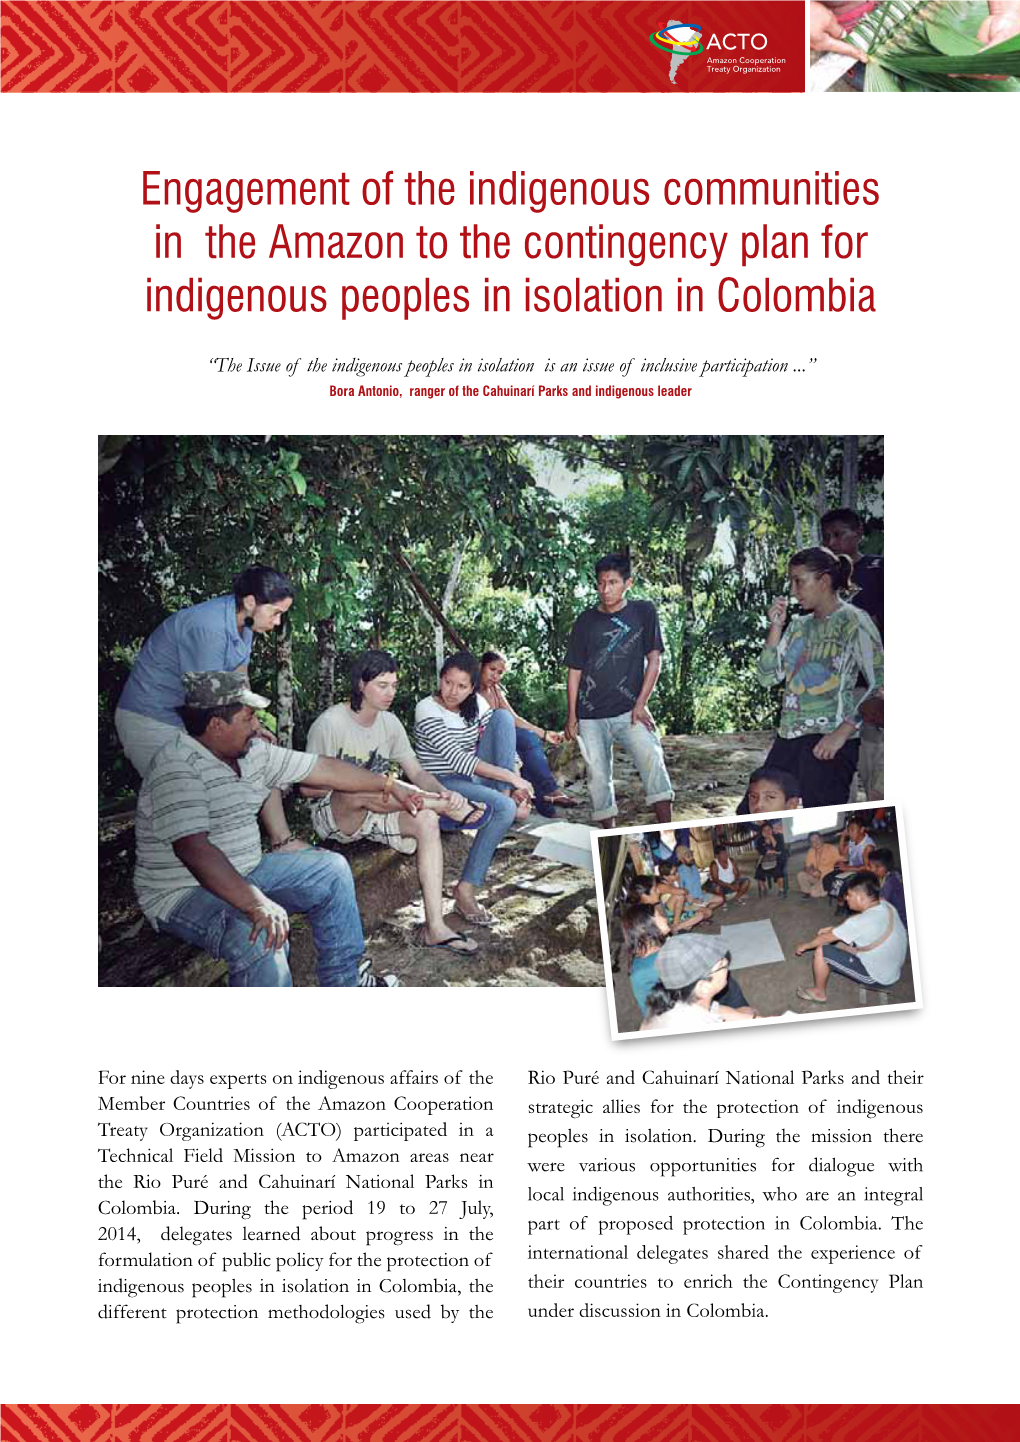 Engagement of the Indigenous Communities in the Amazon to the Contingency Plan for Indigenous Peoples in Isolation in Colombia